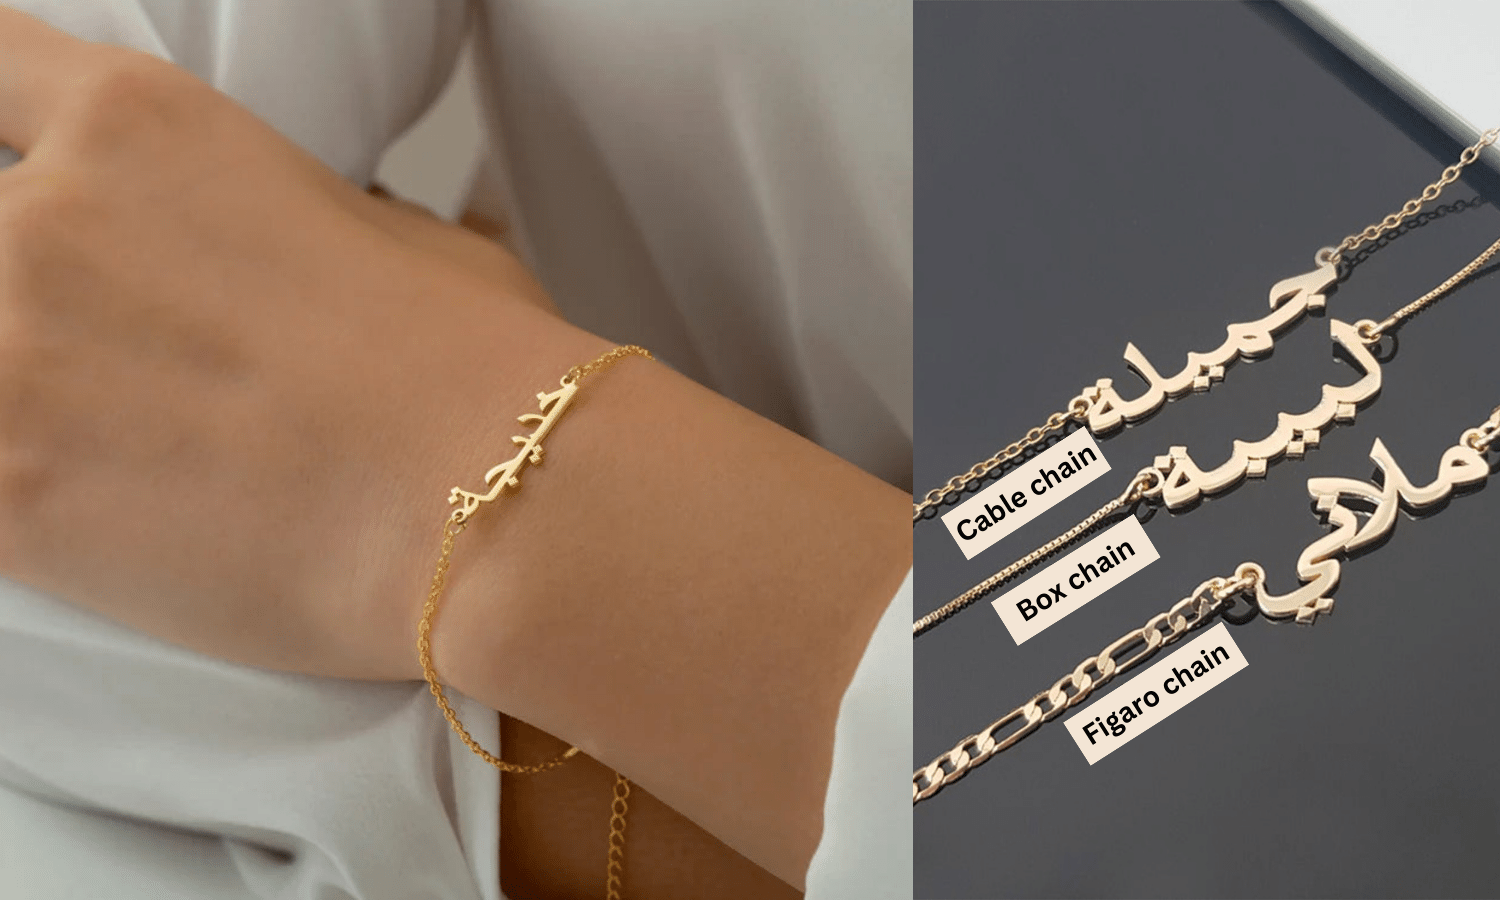 Arabic Luxury Bridal Meenakari Gold Bangles Bracelet With Copper Plating  And Gold Ring, Featuring Leaf Design And Cuff Braceslet 230328 From Dang10,  $14.36 | DHgate.Com